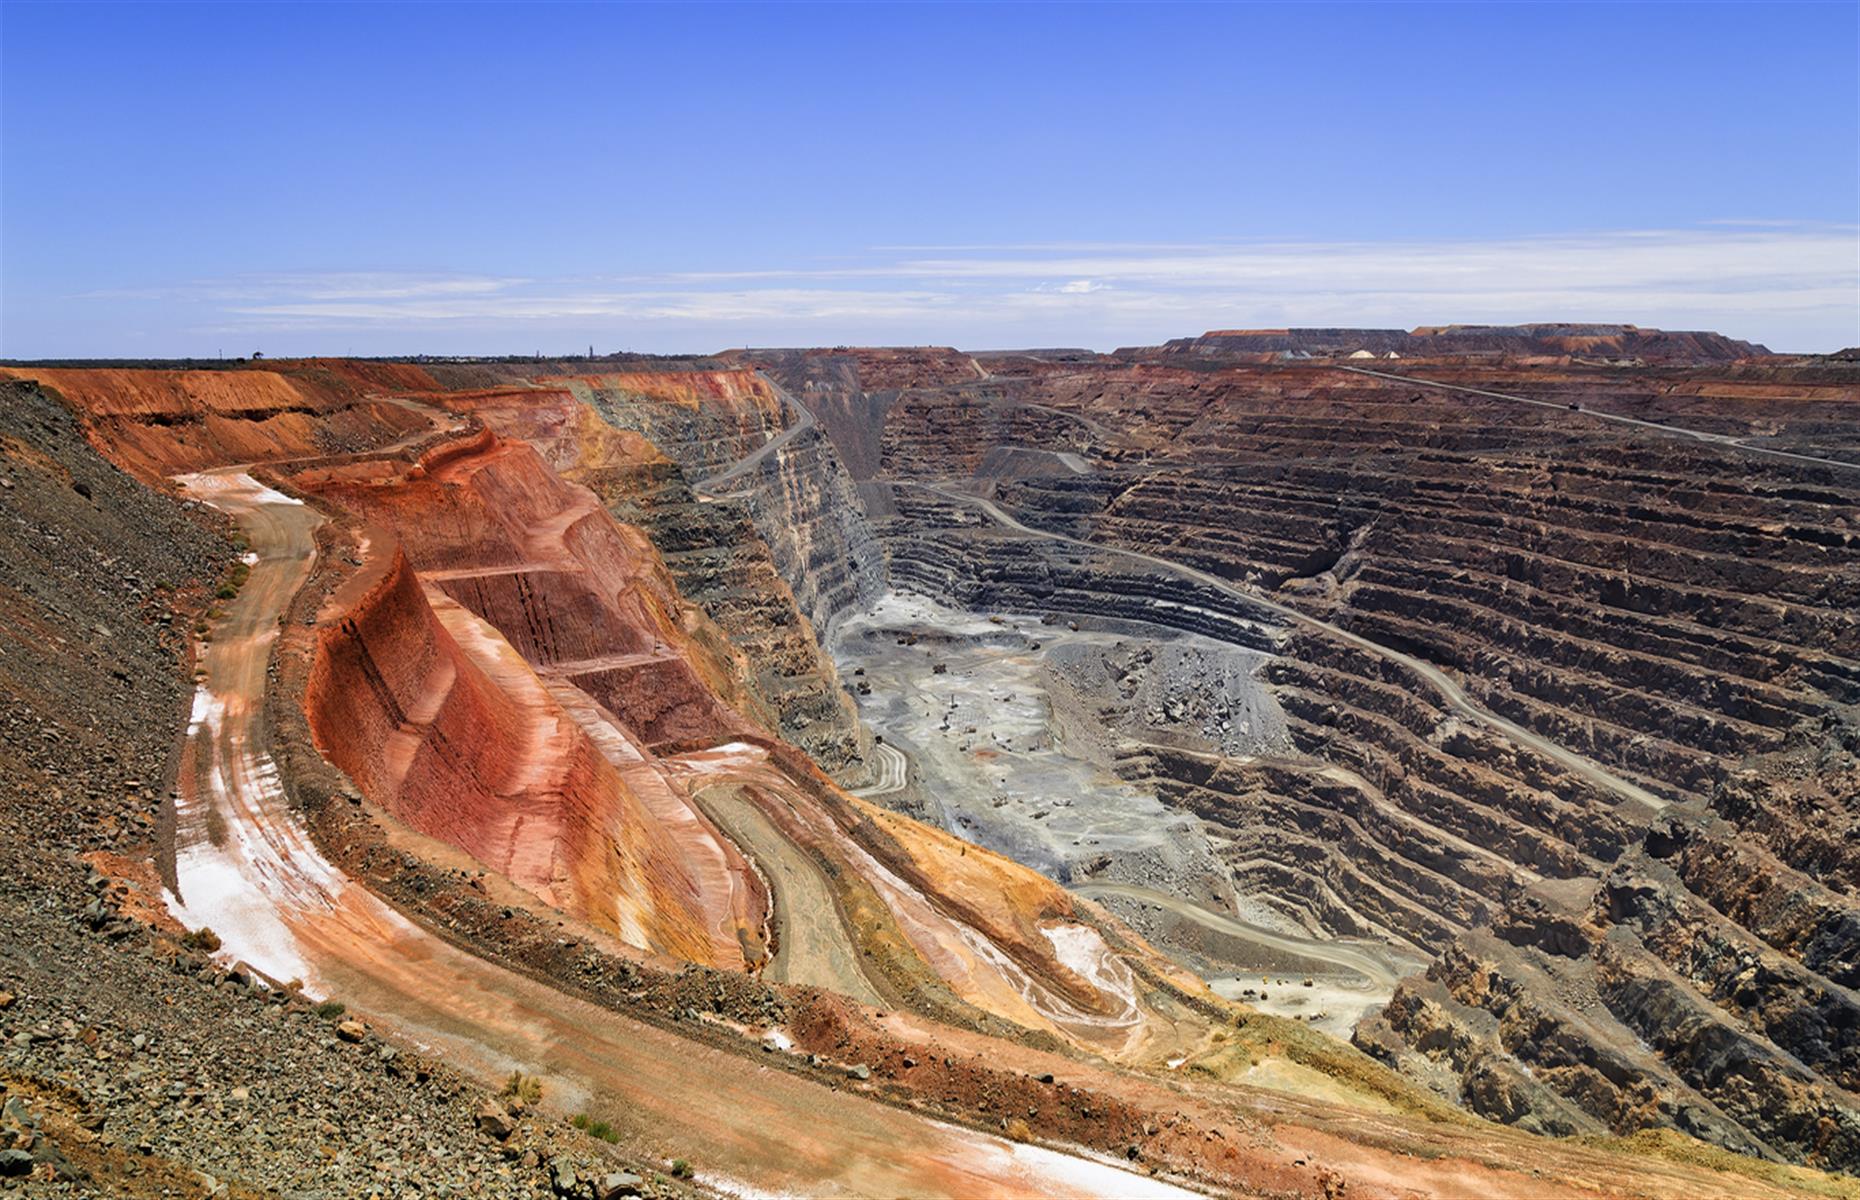 Kalgoorlie’s Super Pit is a sight to behold – stand on the public viewing platform to gaze down the huge terraced hole in the earth which is the biggest gold mine in Australia. Understand what life was like for the early prospectors on an underground tour at the excellent Australian Prospectors and Miners' Hall of Fame, just outside of town, and try your hand at gold panning too. Stay in the charming Palace Hotel, built in 1897 and the first hotel in the state to have electricity.